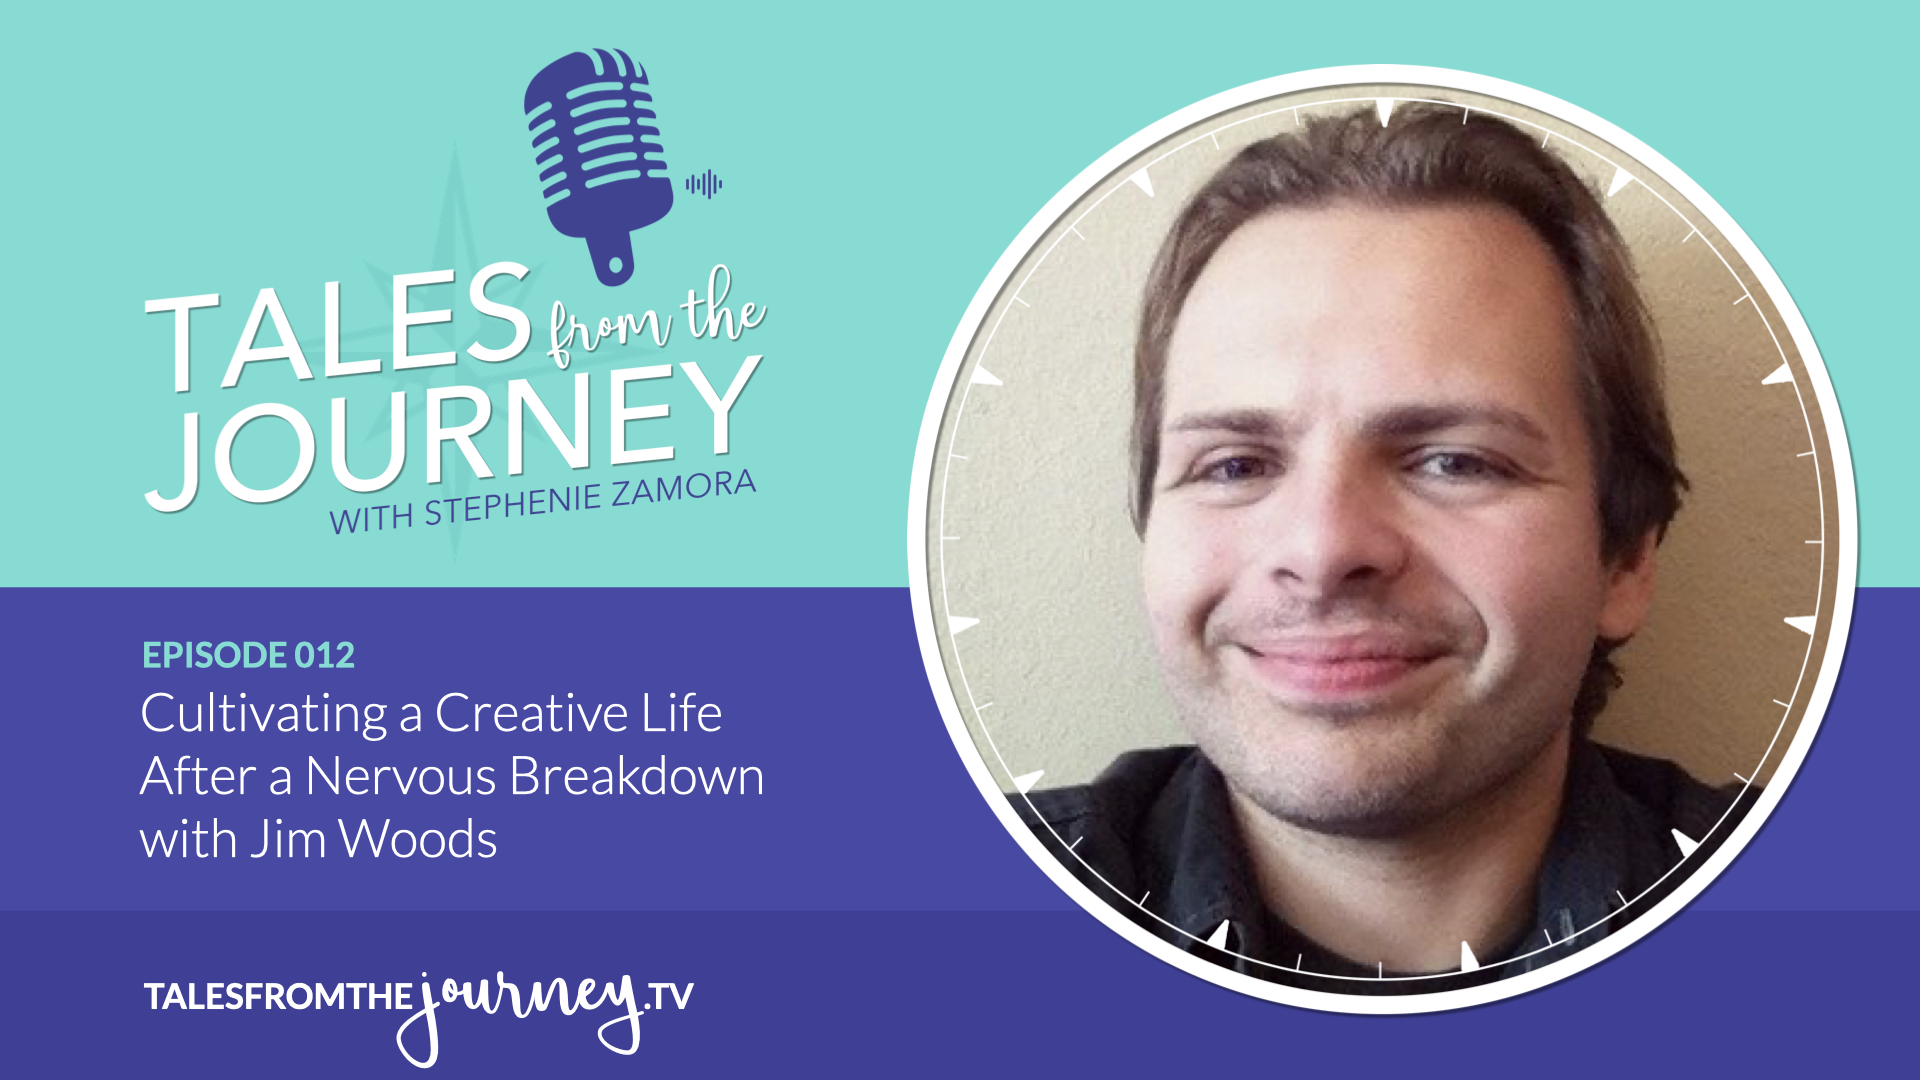 Cultivating a Creative Life After a Nervous Breakdown with Jim Woods